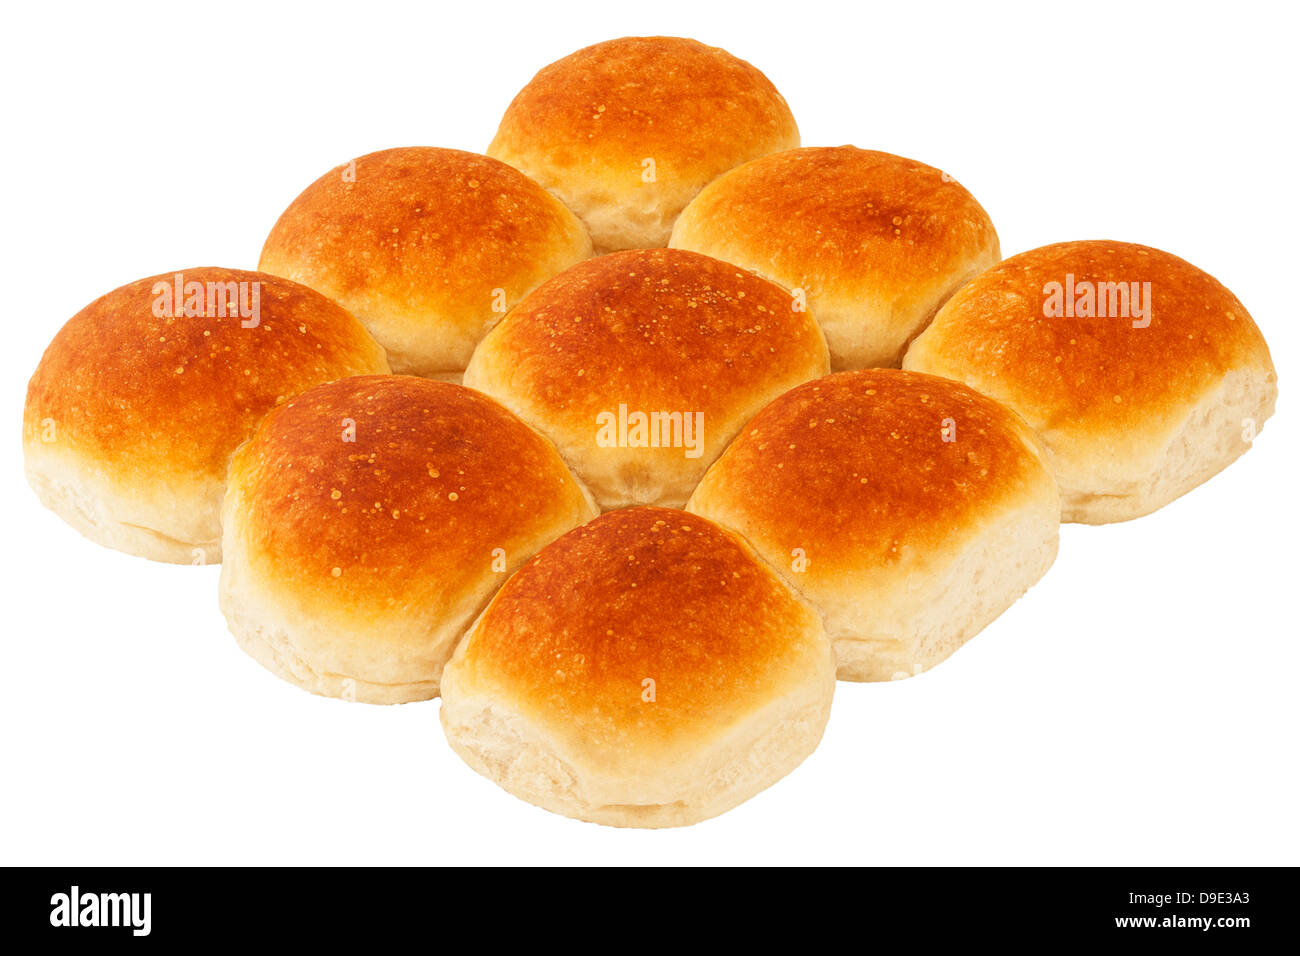 A home made batch of 9 white bread rolls on a white background Stock Photo